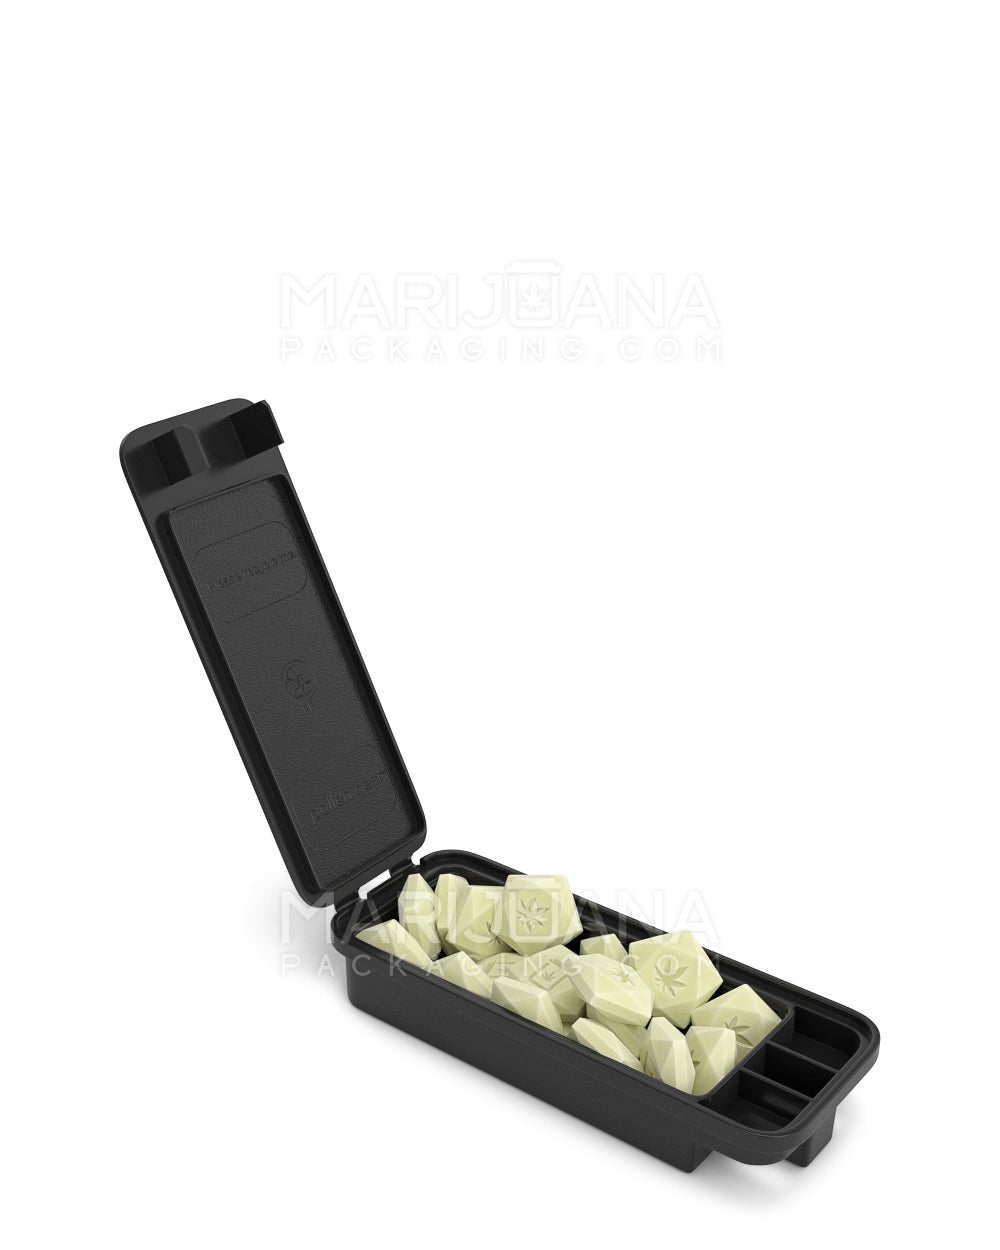 Child Resistant | Snap Box Edible & Pre-Roll Joint Case | Small - Black Plastic - 450 Count - 3